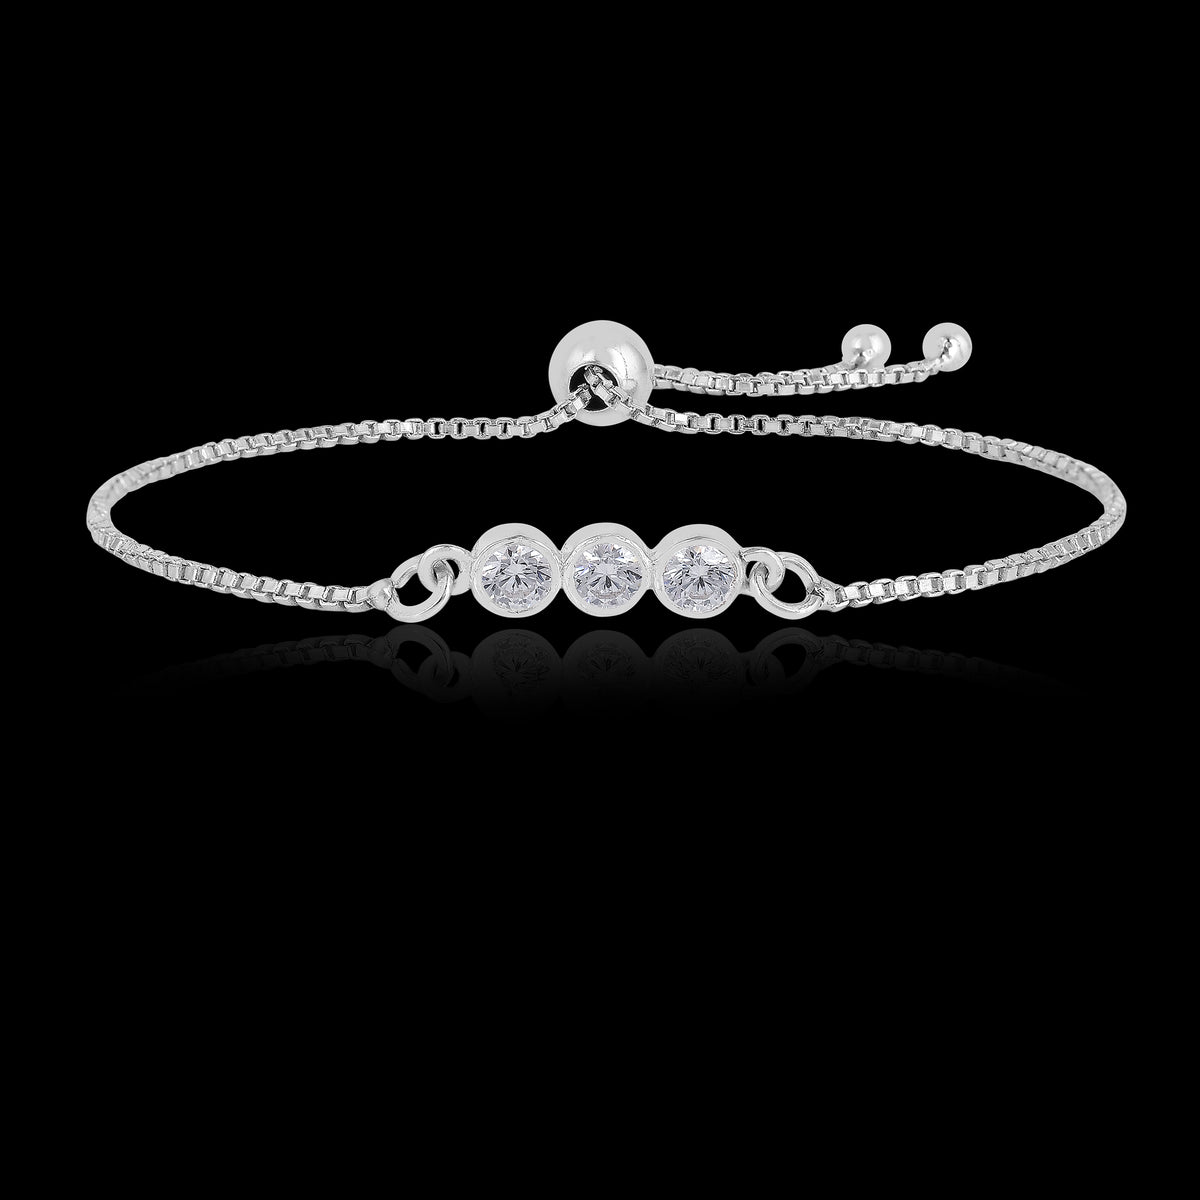 925 Sterling Silver Cubic Zirconia Minimal Chain Bracelet Gift for Her